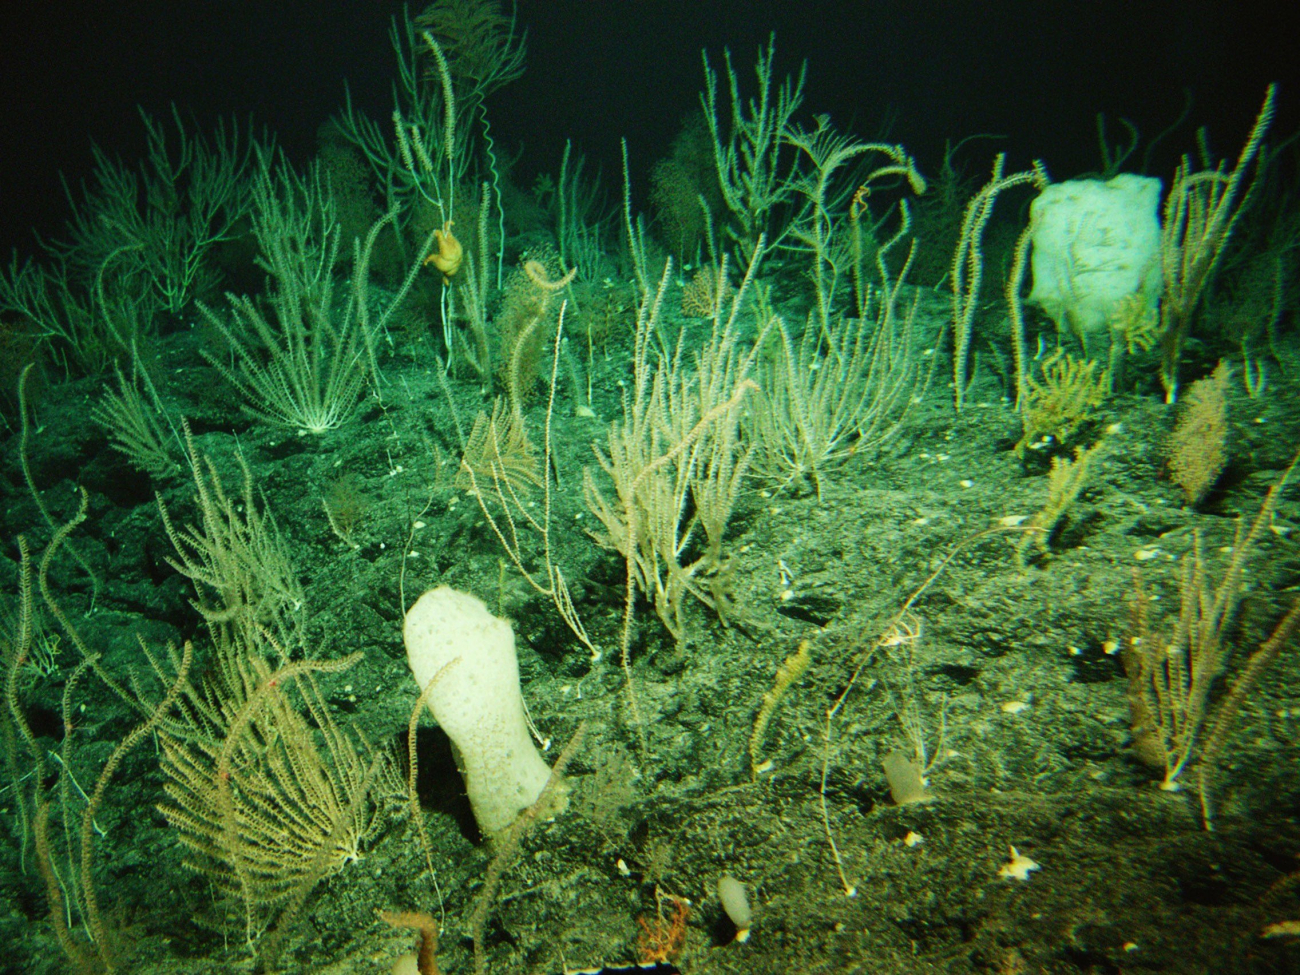 The seamount communities were both diverse and dense as seen here where thesubstrate cannot be seen below the life forms